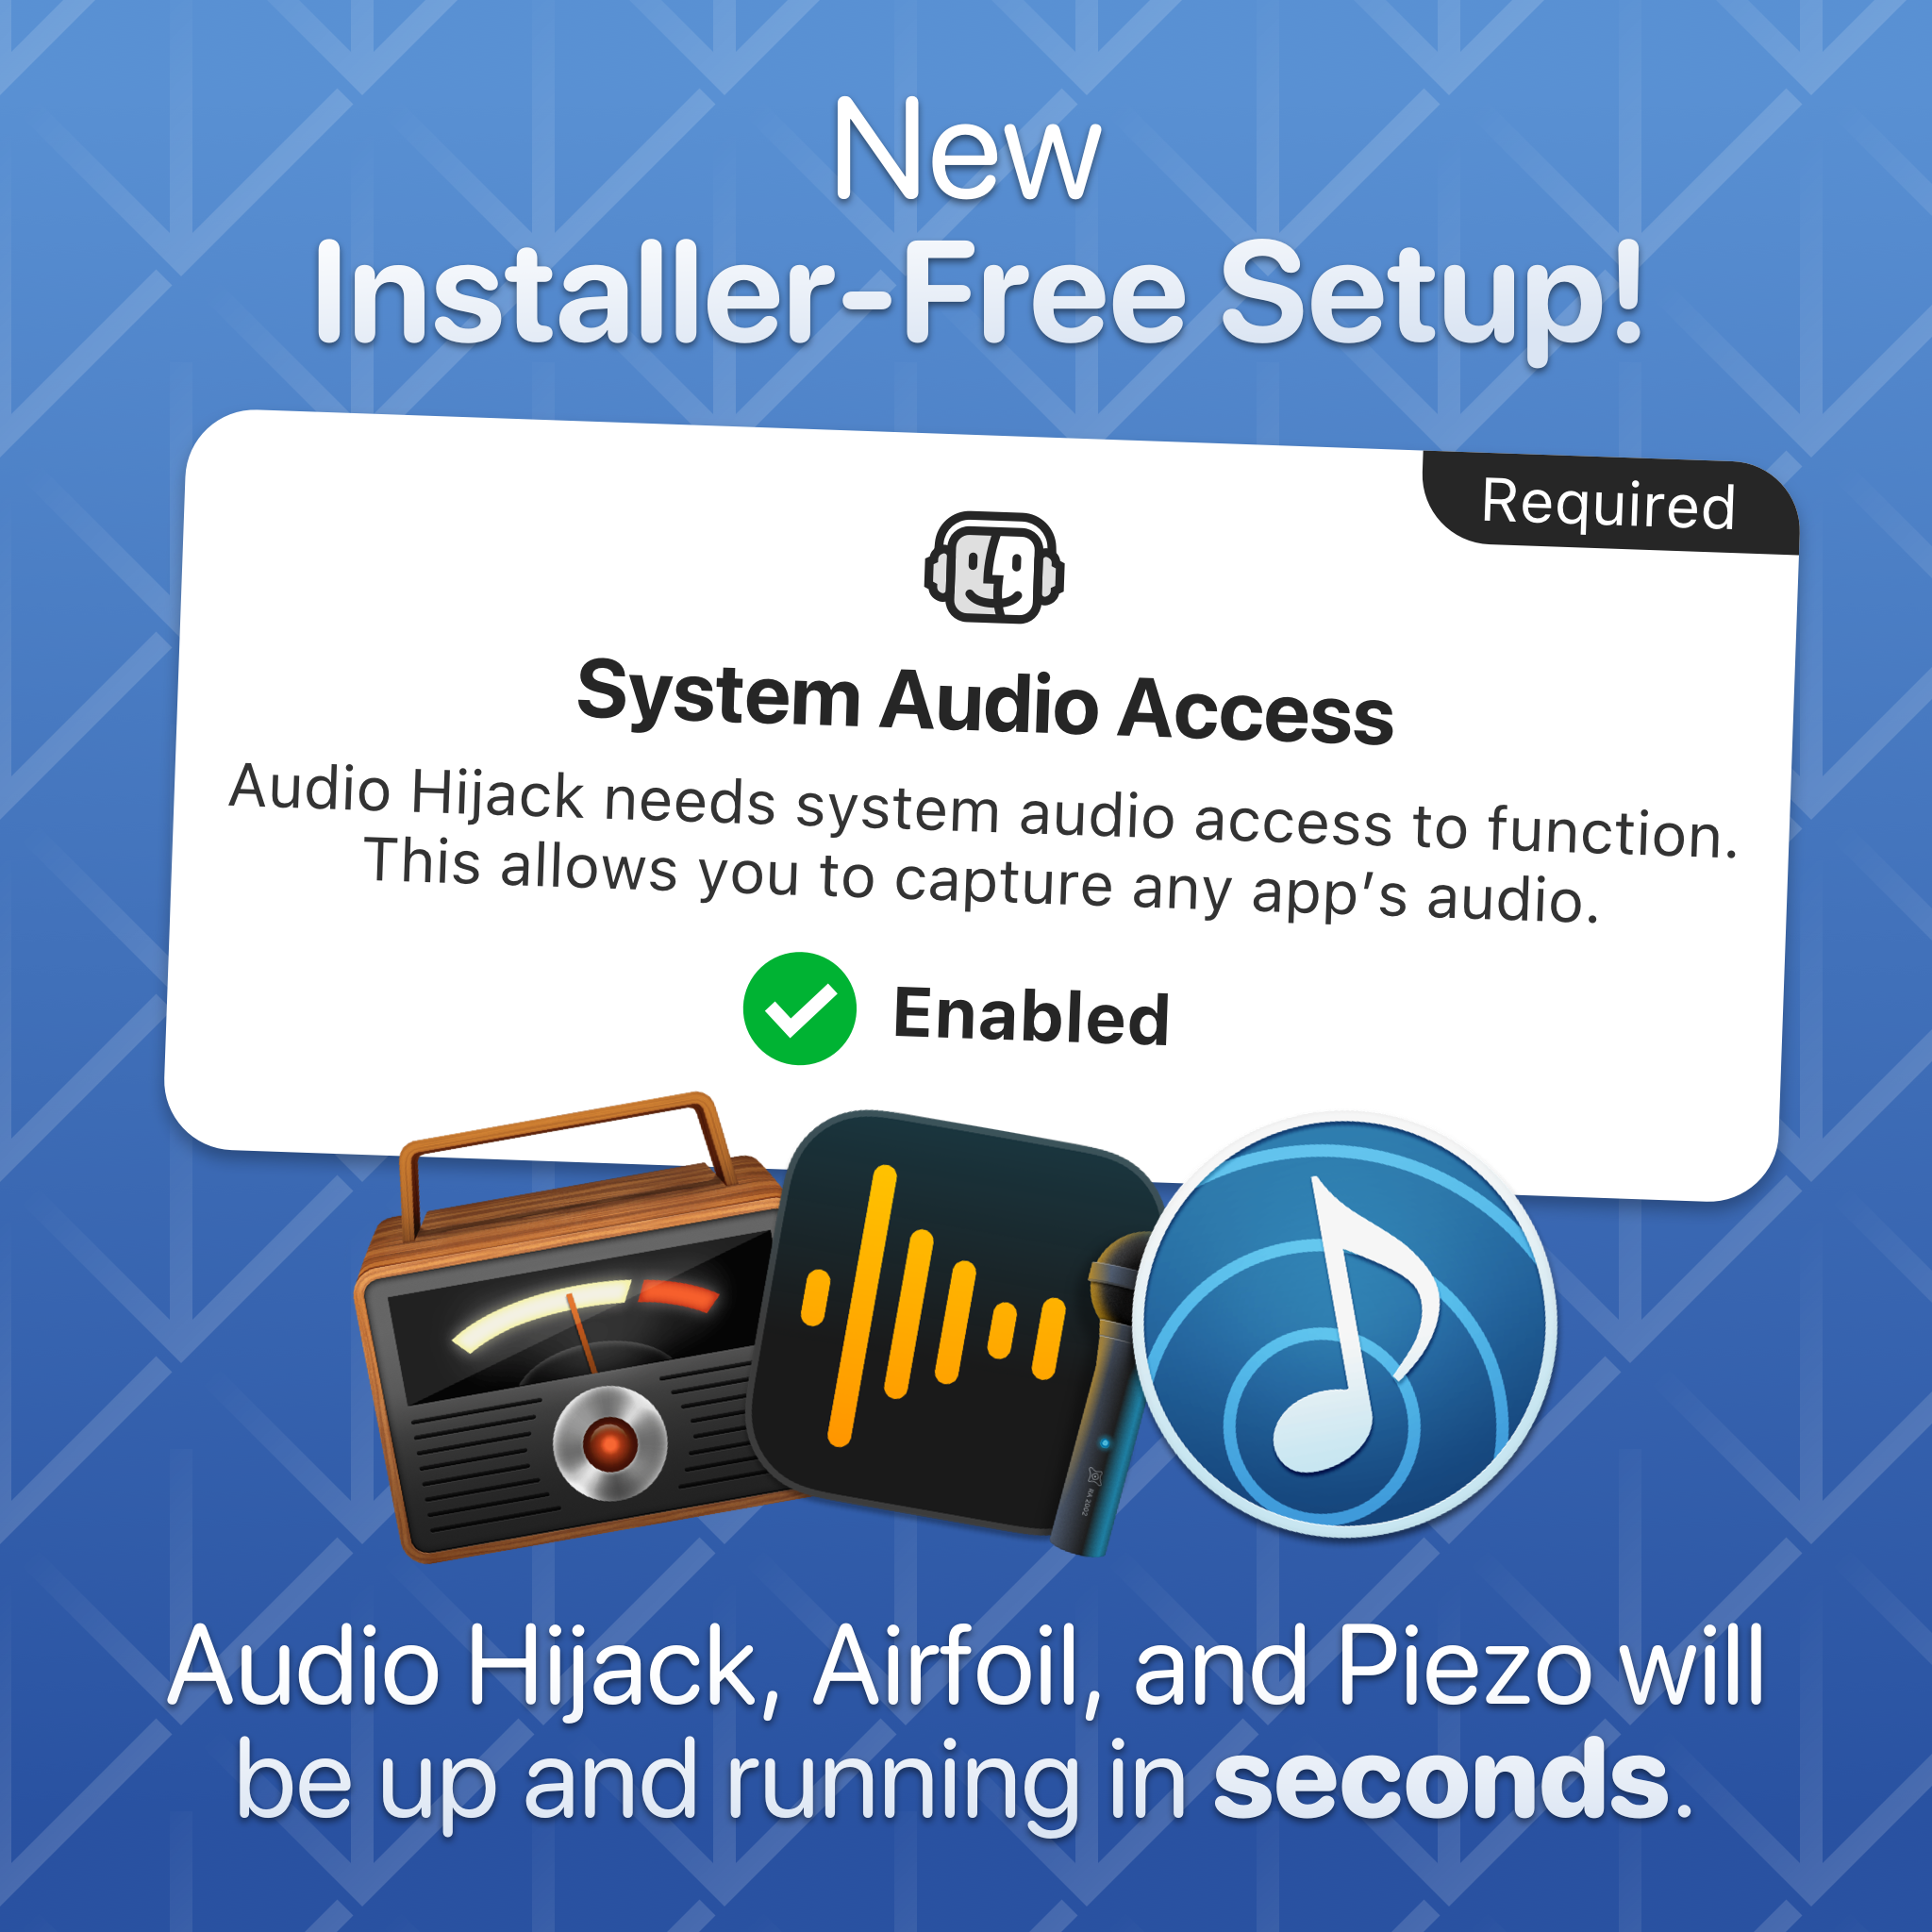 New installer-free setup for Audio Hijack, Airfoil, and Piezo